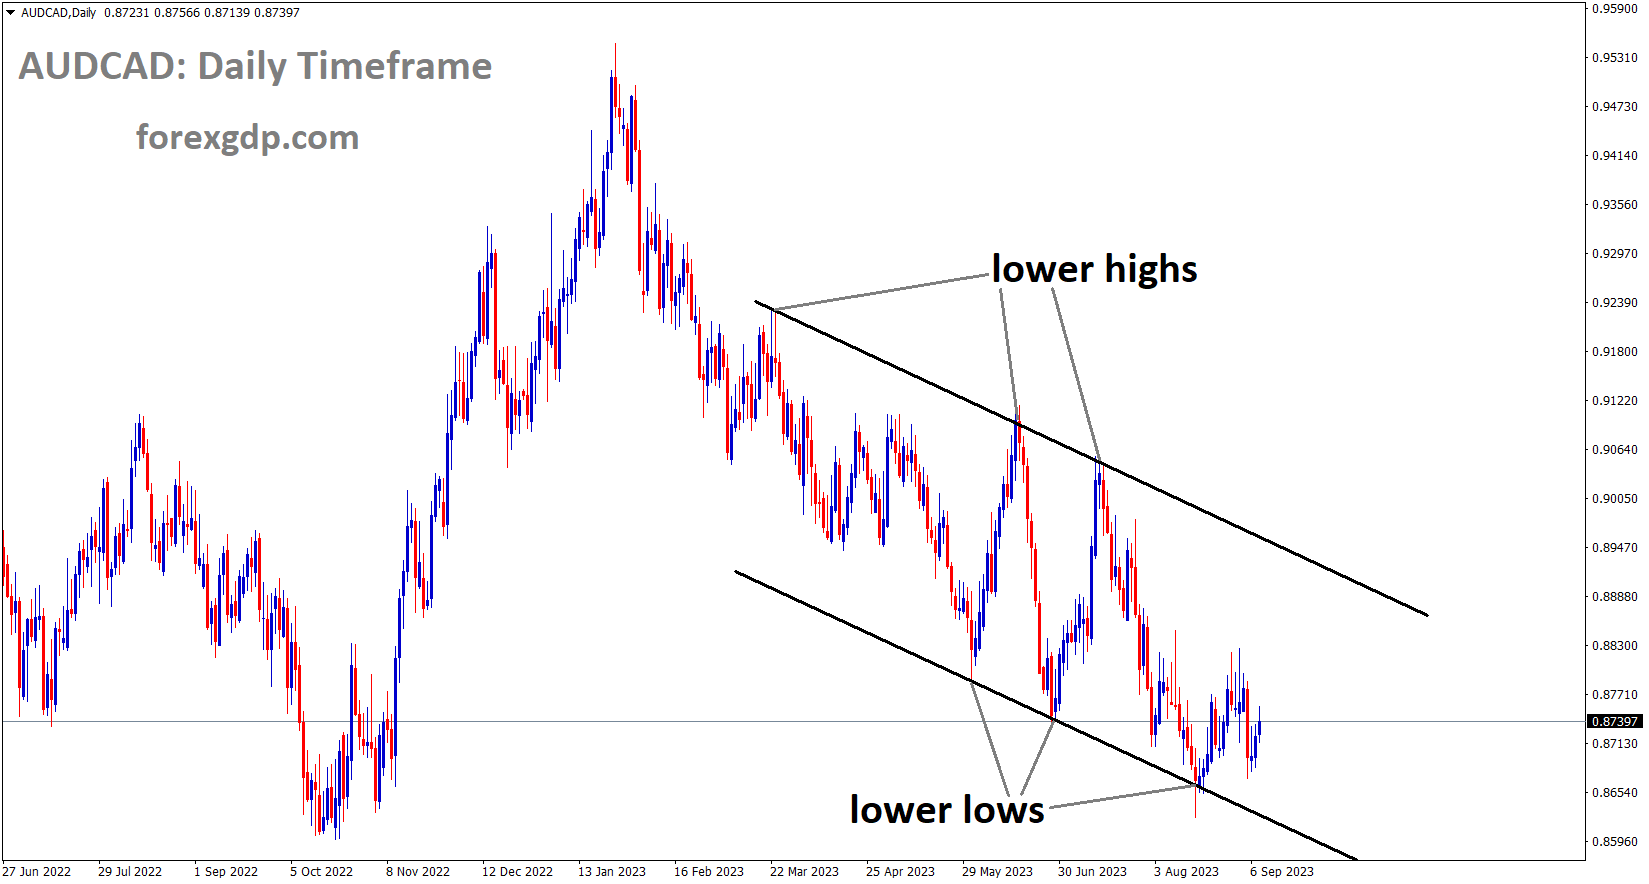 AUDCAD is moving in the Descending channel and the market has rebounded from the lower low area of the channel